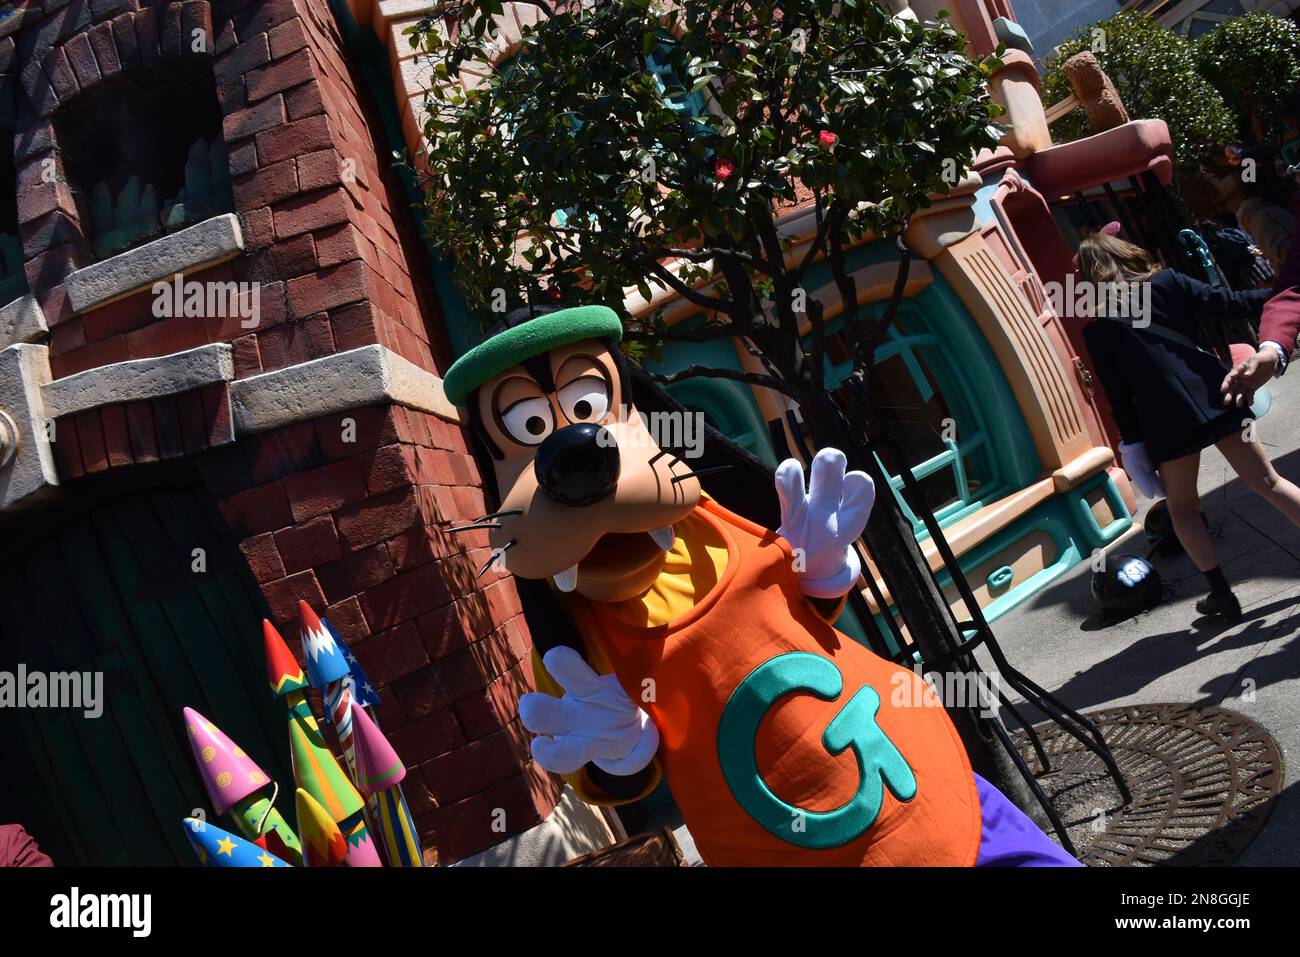 A cute character goofy in Disneyland during the daytime Stock Photo